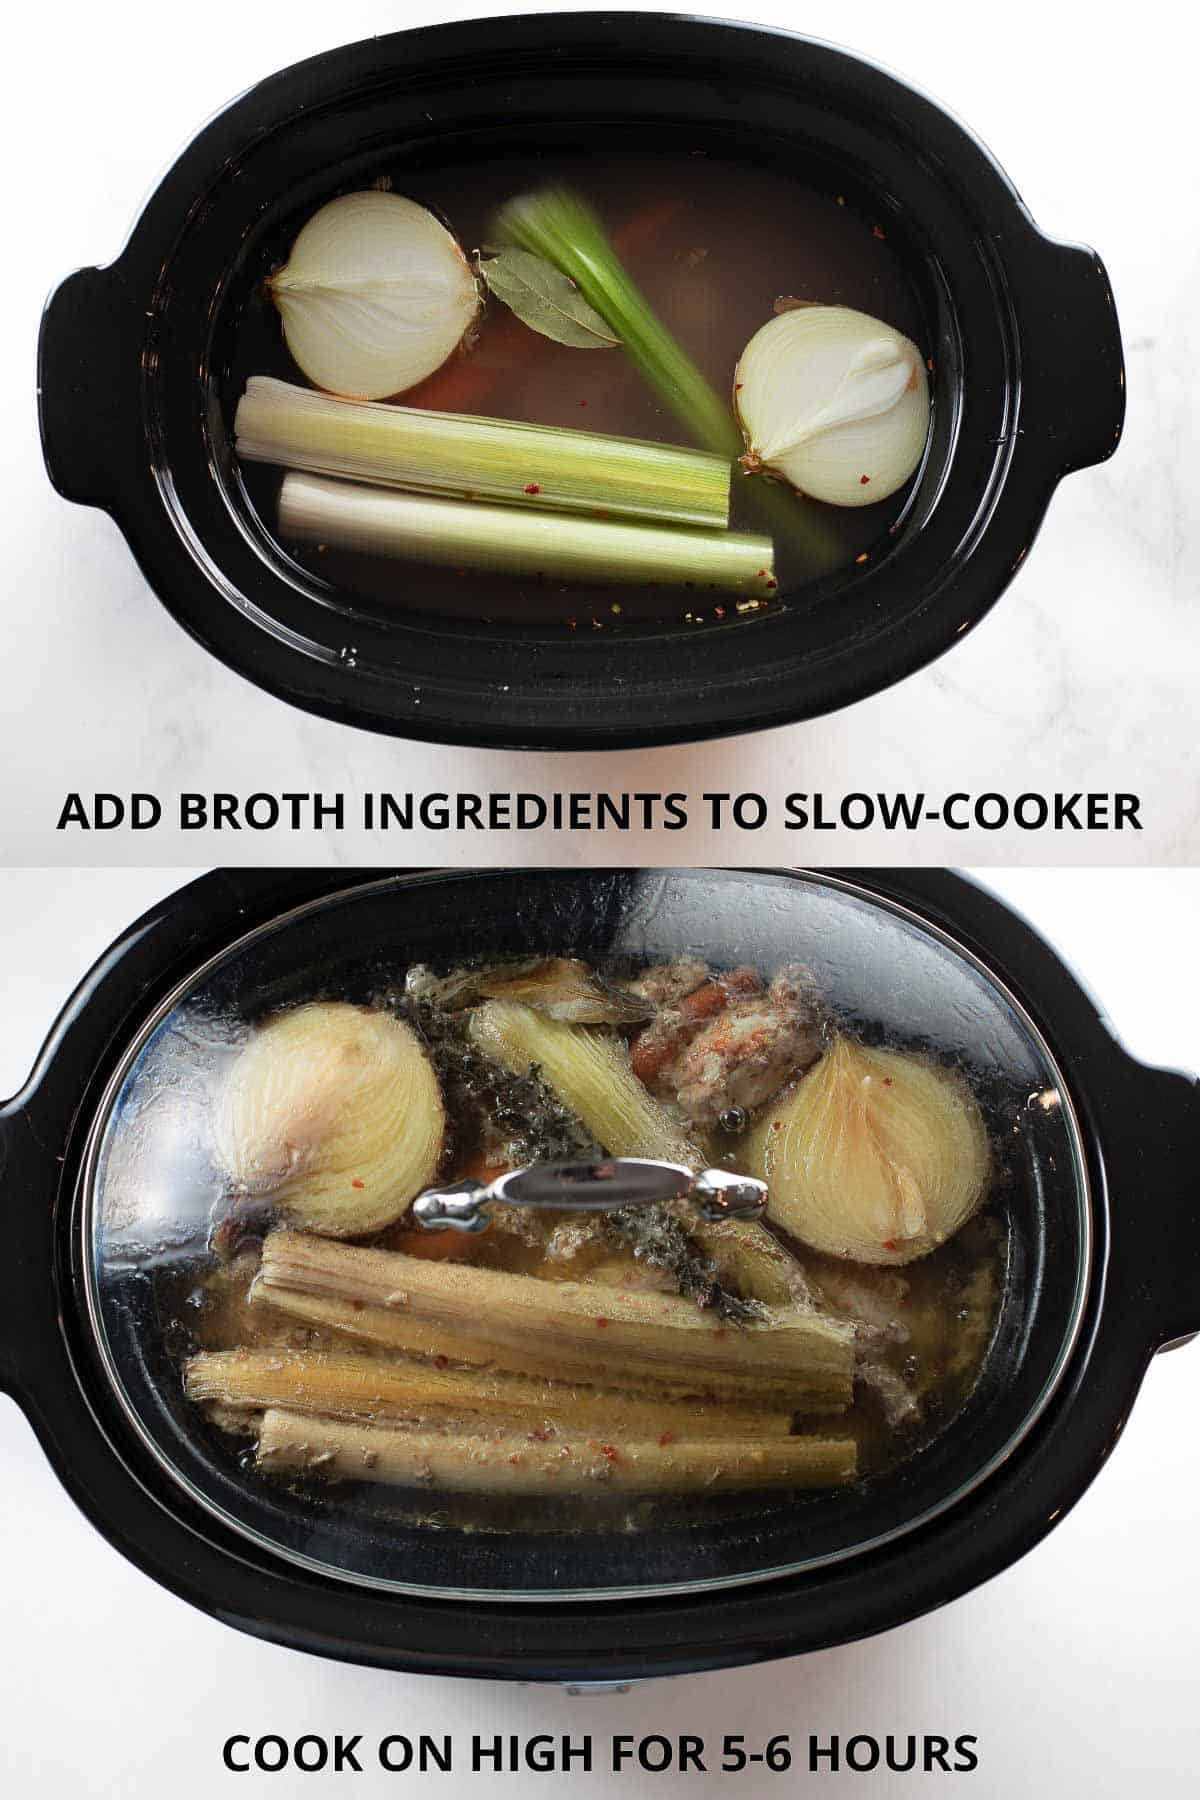 slow cooker filled with vegetables and broth being cooked on high to make chicken broth